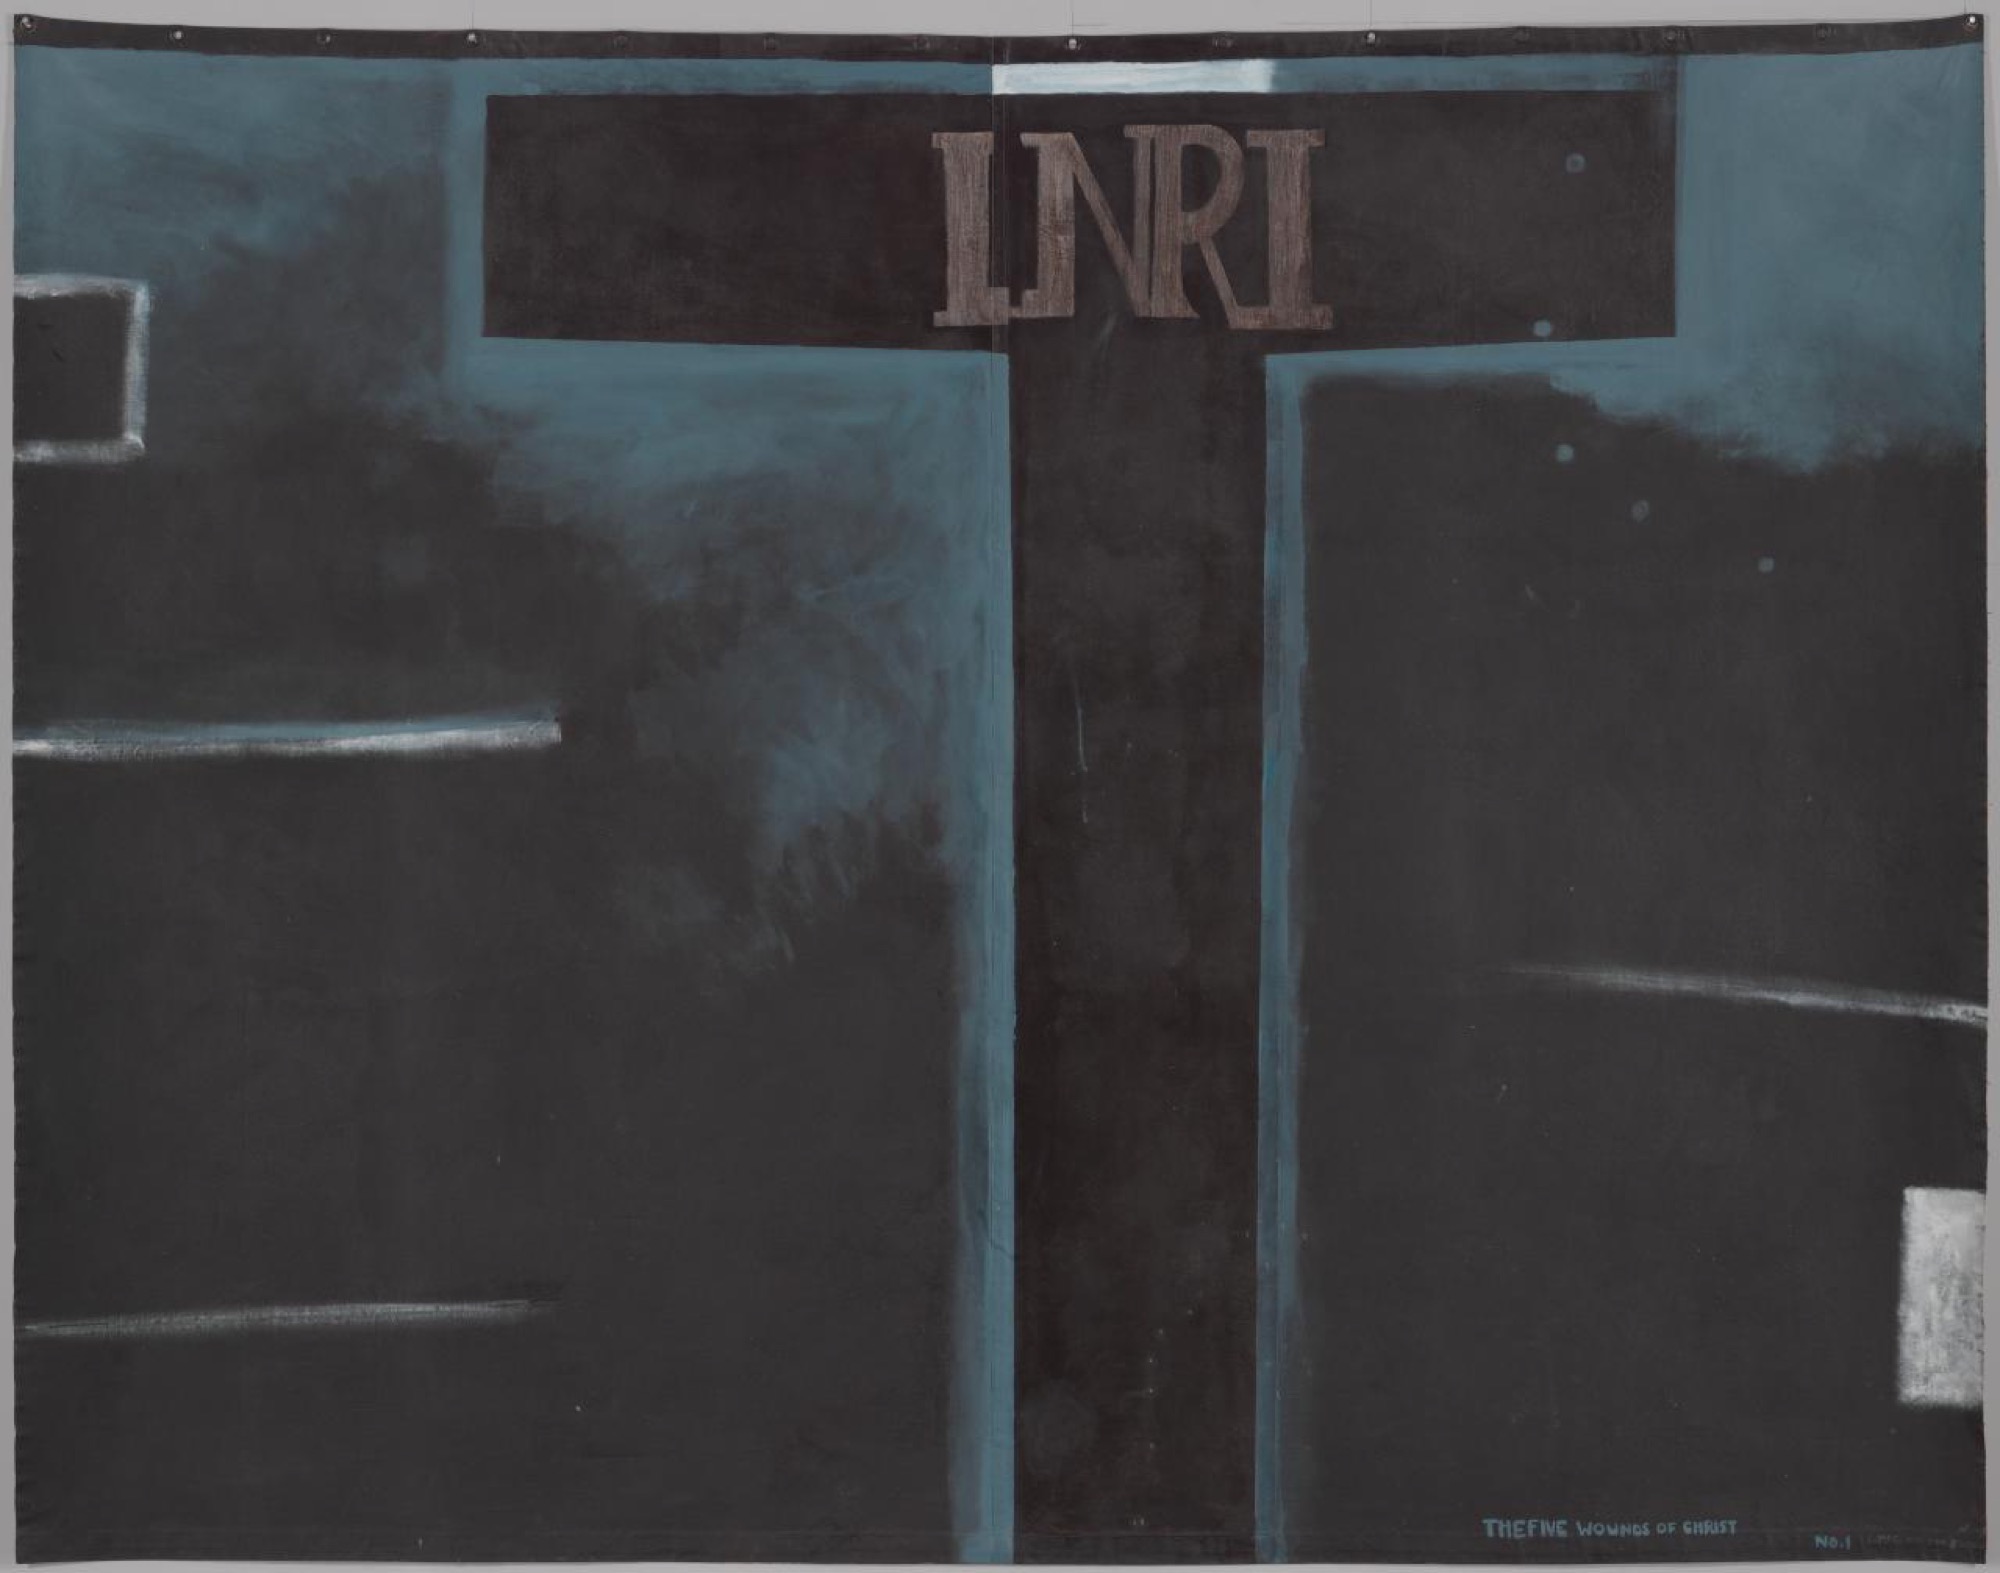 Colin McCAHON, The five wounds of Christ no. 1 1977-1978, synthetic polymer paint on canvas, 235.5 x 298.5 cm irreg., National Gallery of Victoria, Melbourne, Purchased, NGV Foundation with the assistance of Dame Jennifer Gibbs and the proceeds of the 2011 National Gallery of Victoria Annual Dinner, 2012, 2012.192, © Colin McCahon Research and Publication Trust